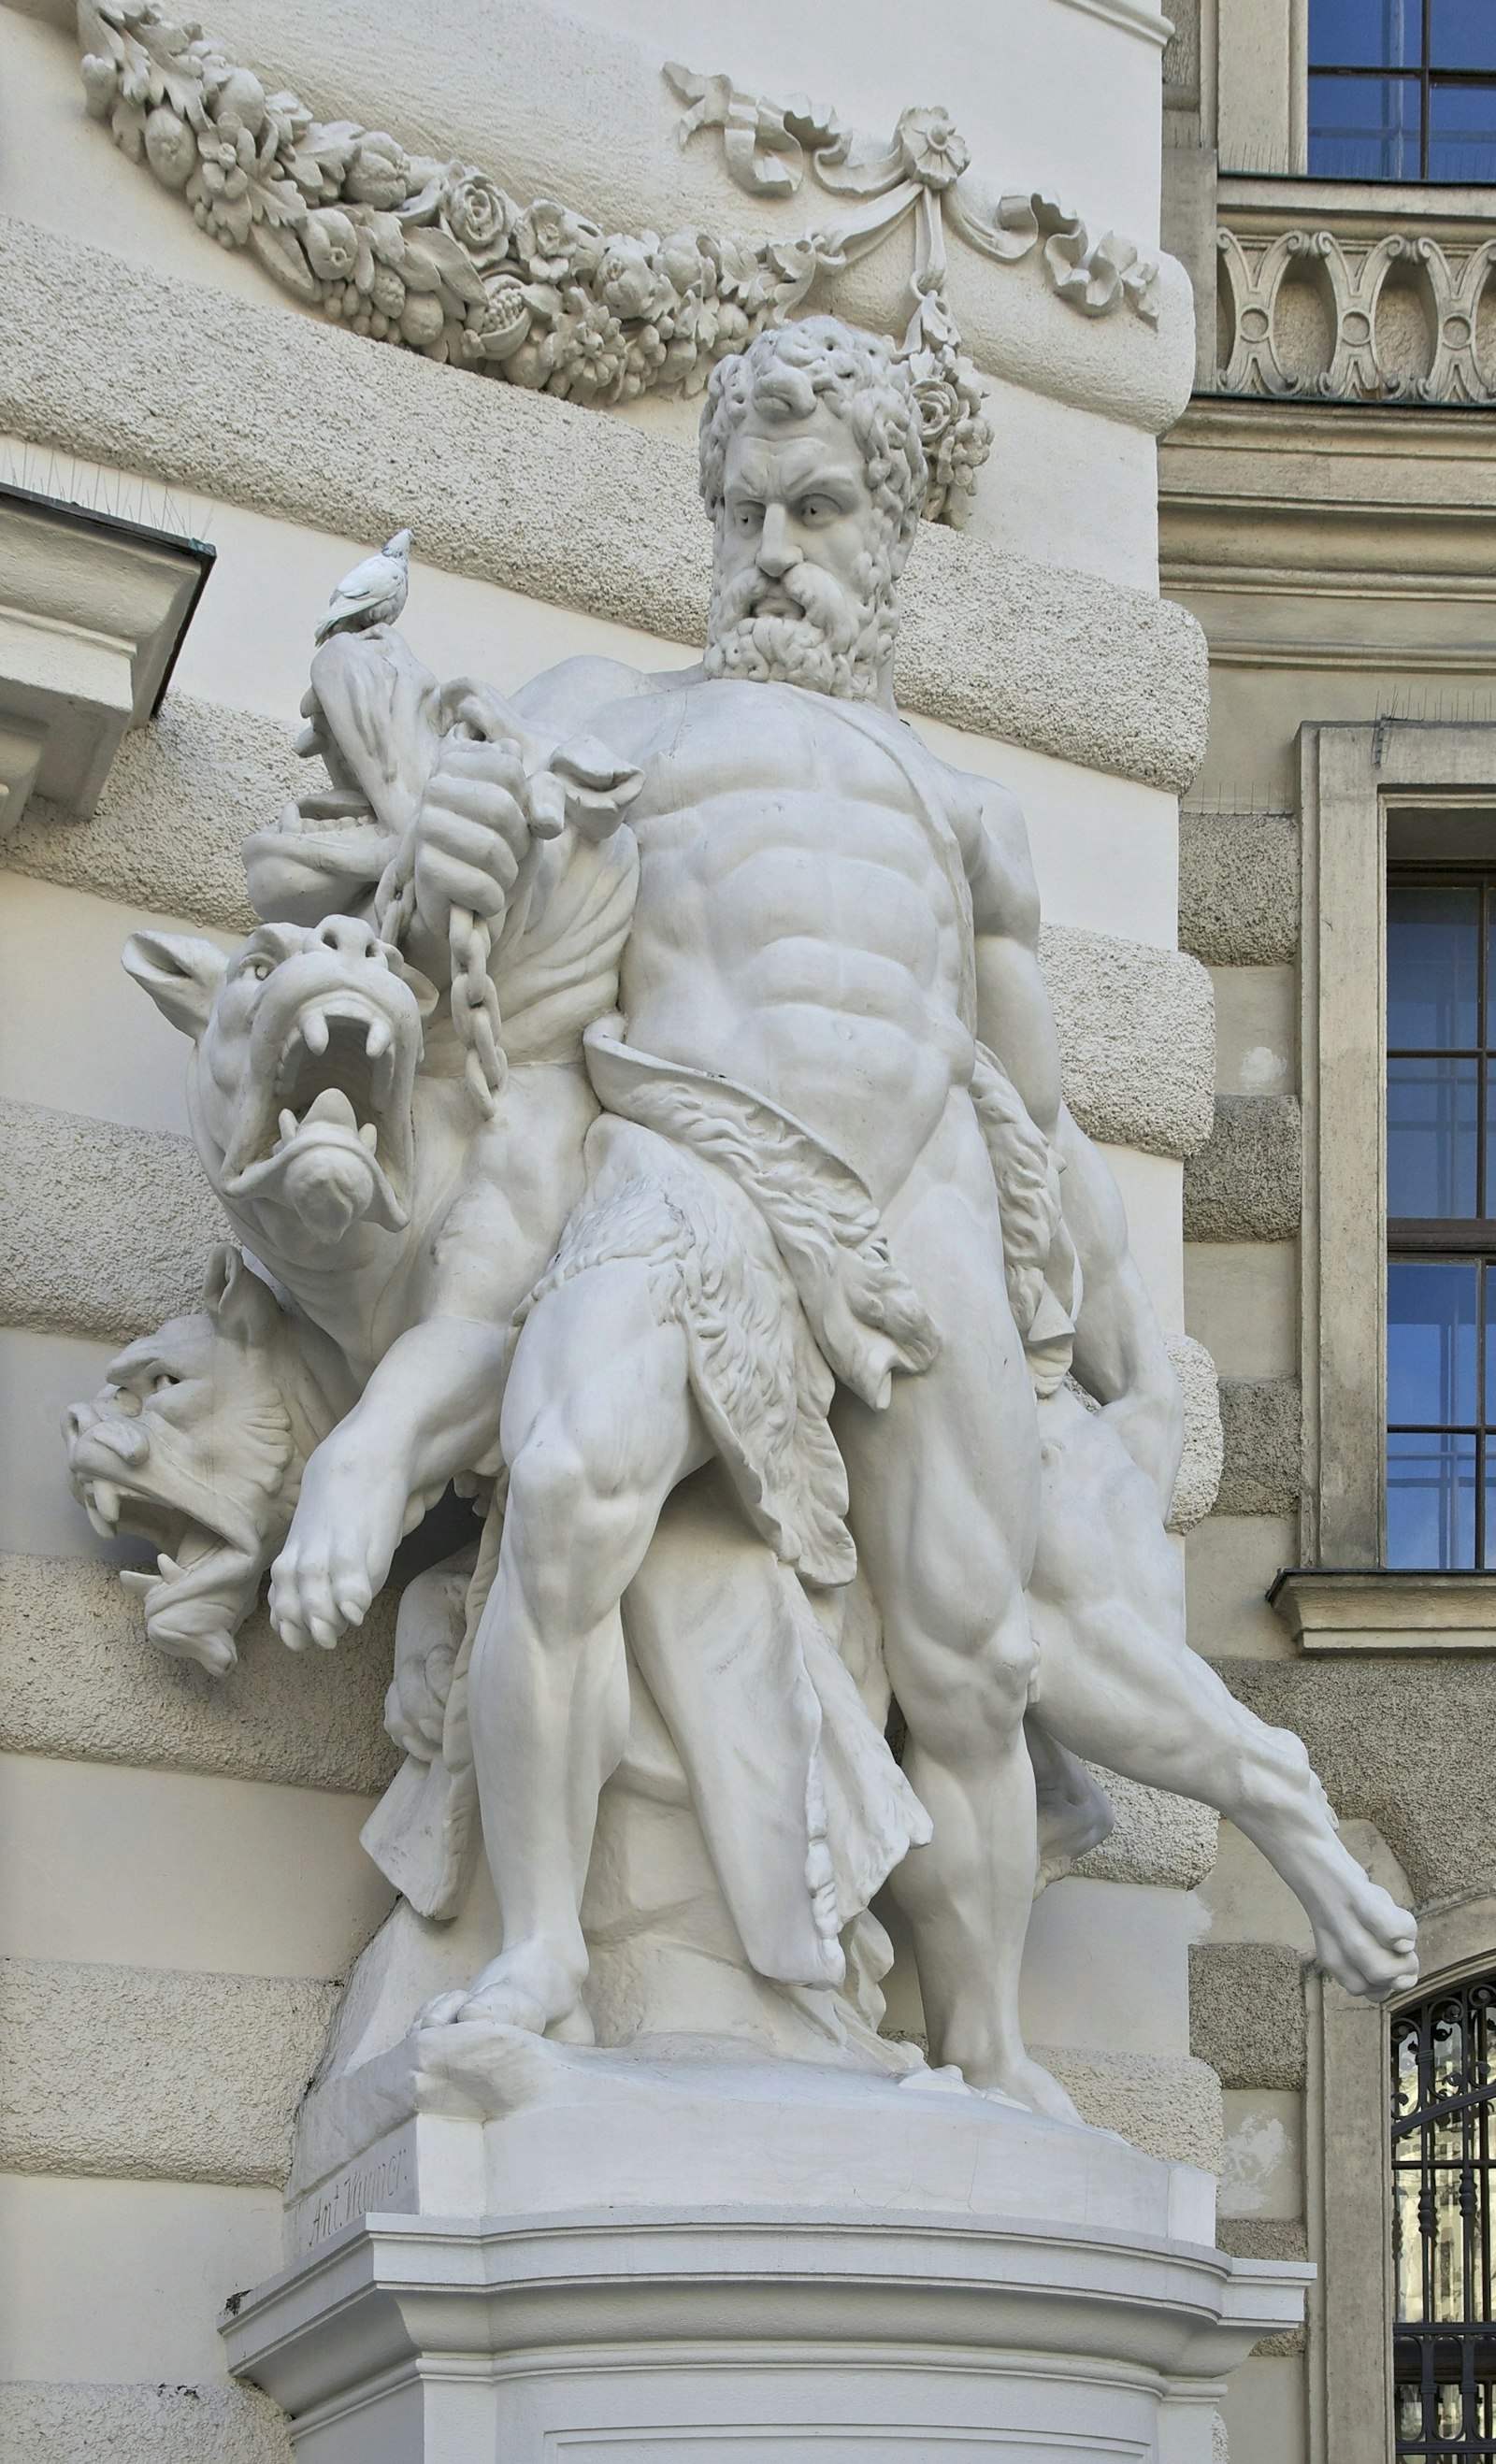 Hercules and Cerberus statue by Antonin Pavel Wagner